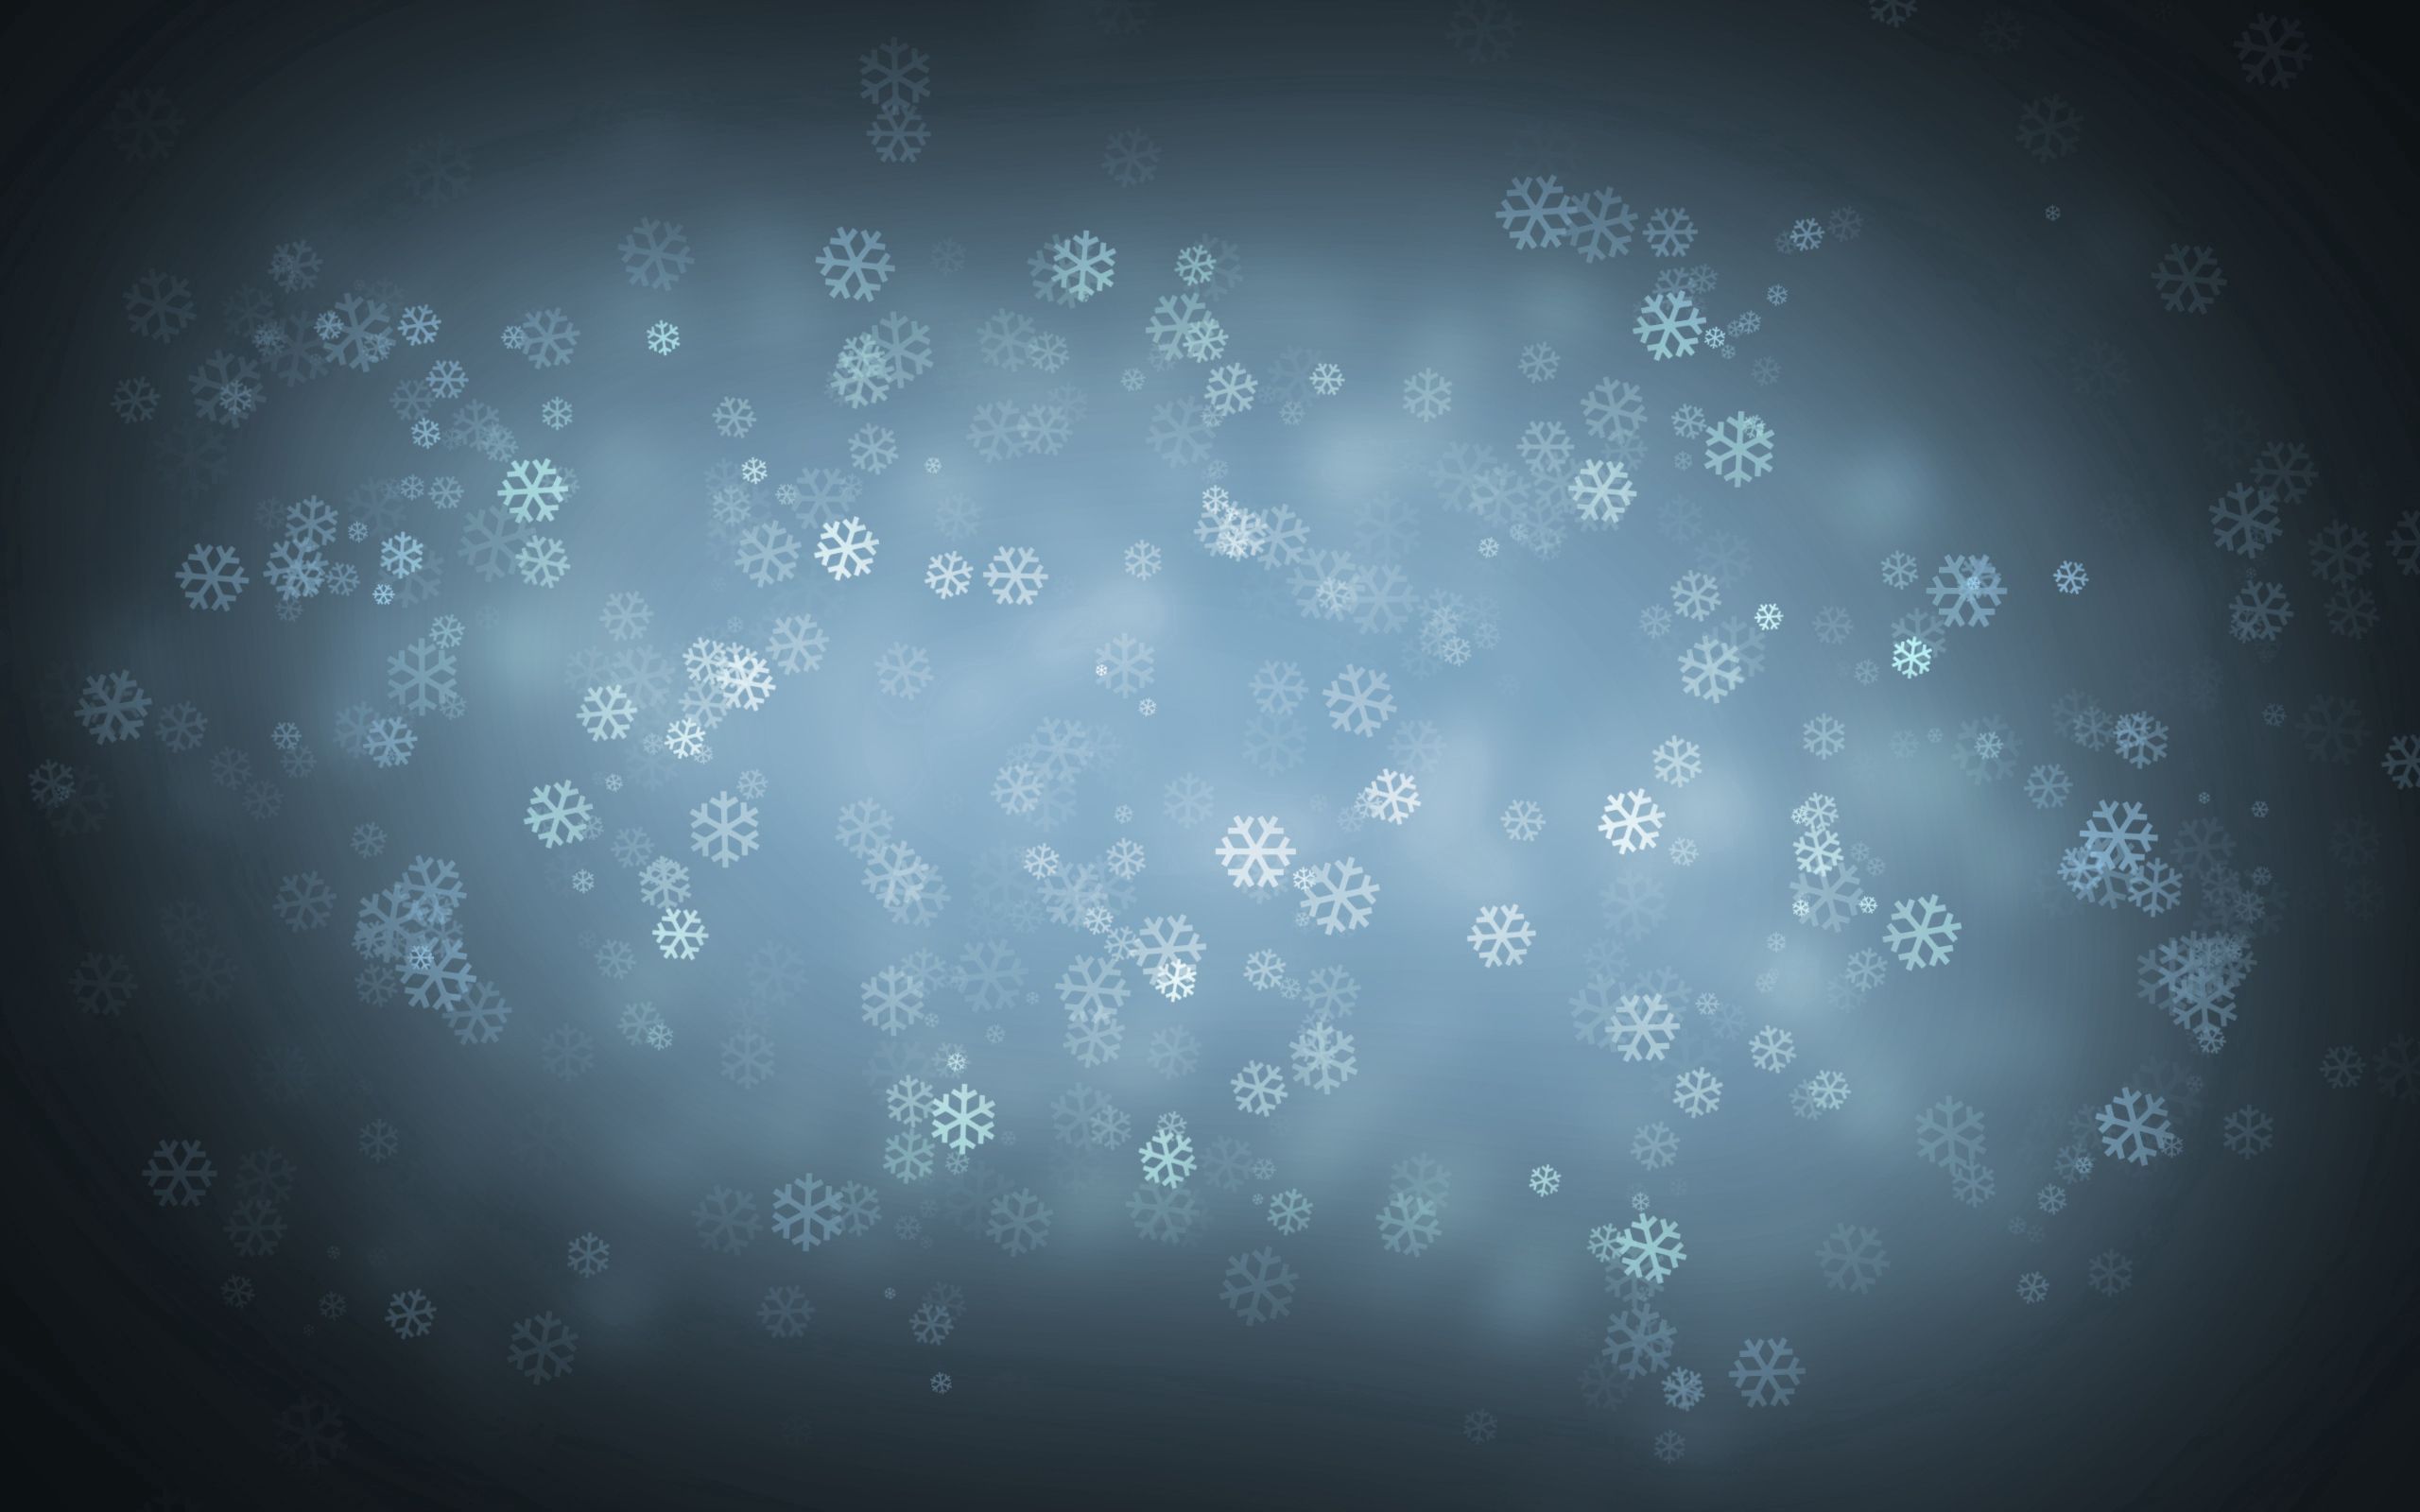 69697 download wallpaper abstract, winter, background, snow, snowflakes, glare, style screensavers and pictures for free